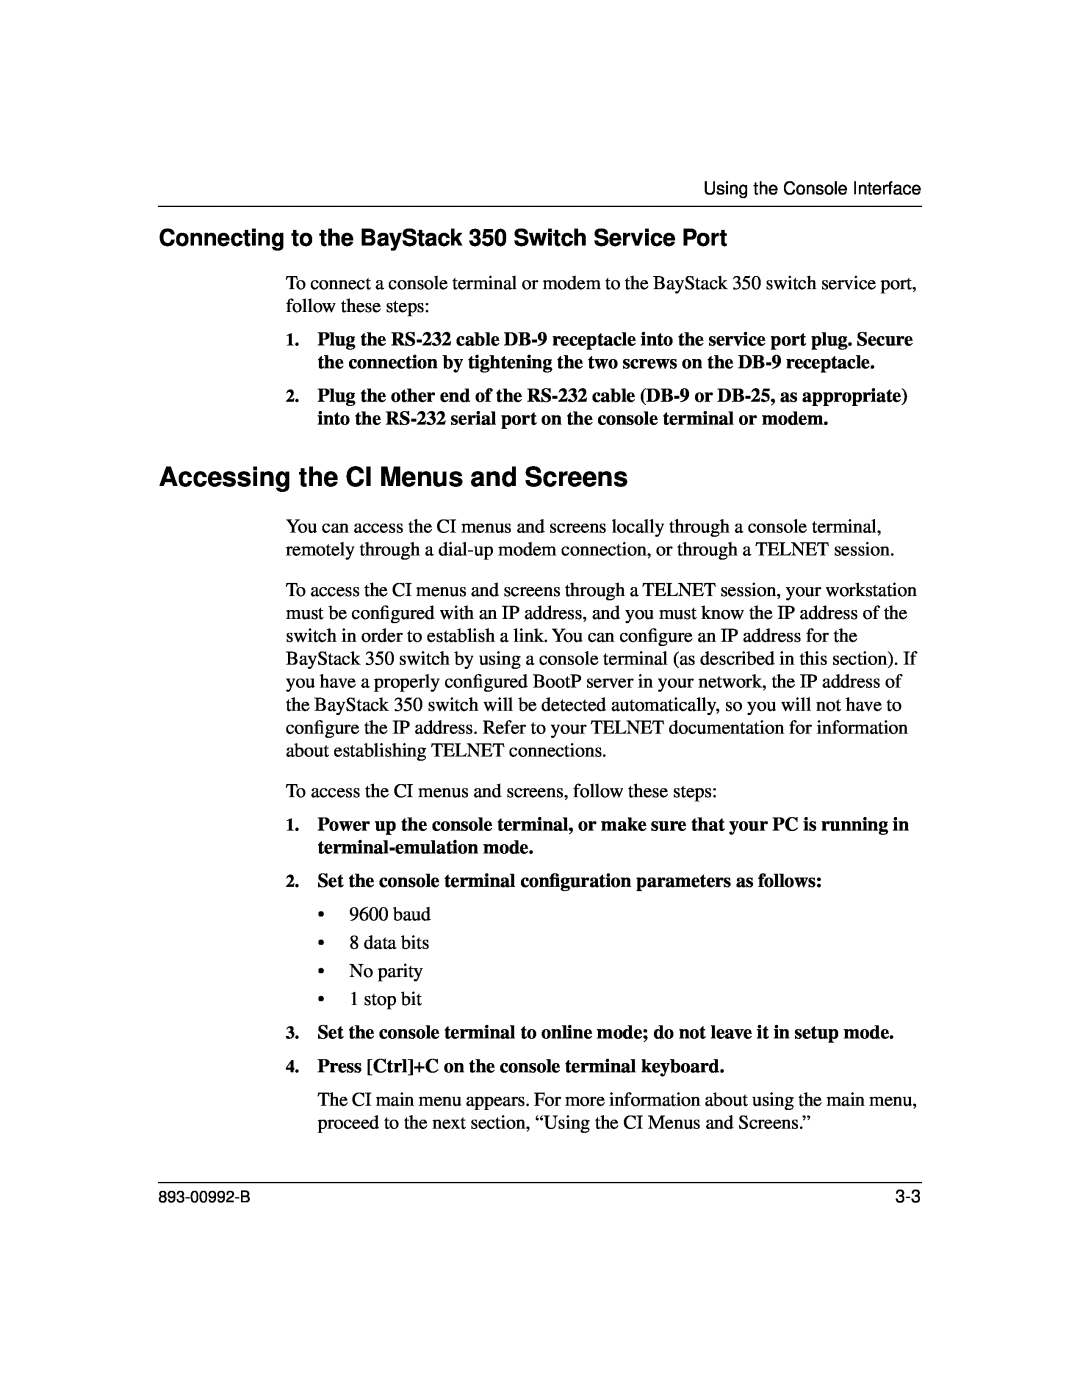 Bay Technical Associates manual Accessing the CI Menus and Screens, Connecting to the BayStack 350 Switch Service Port 